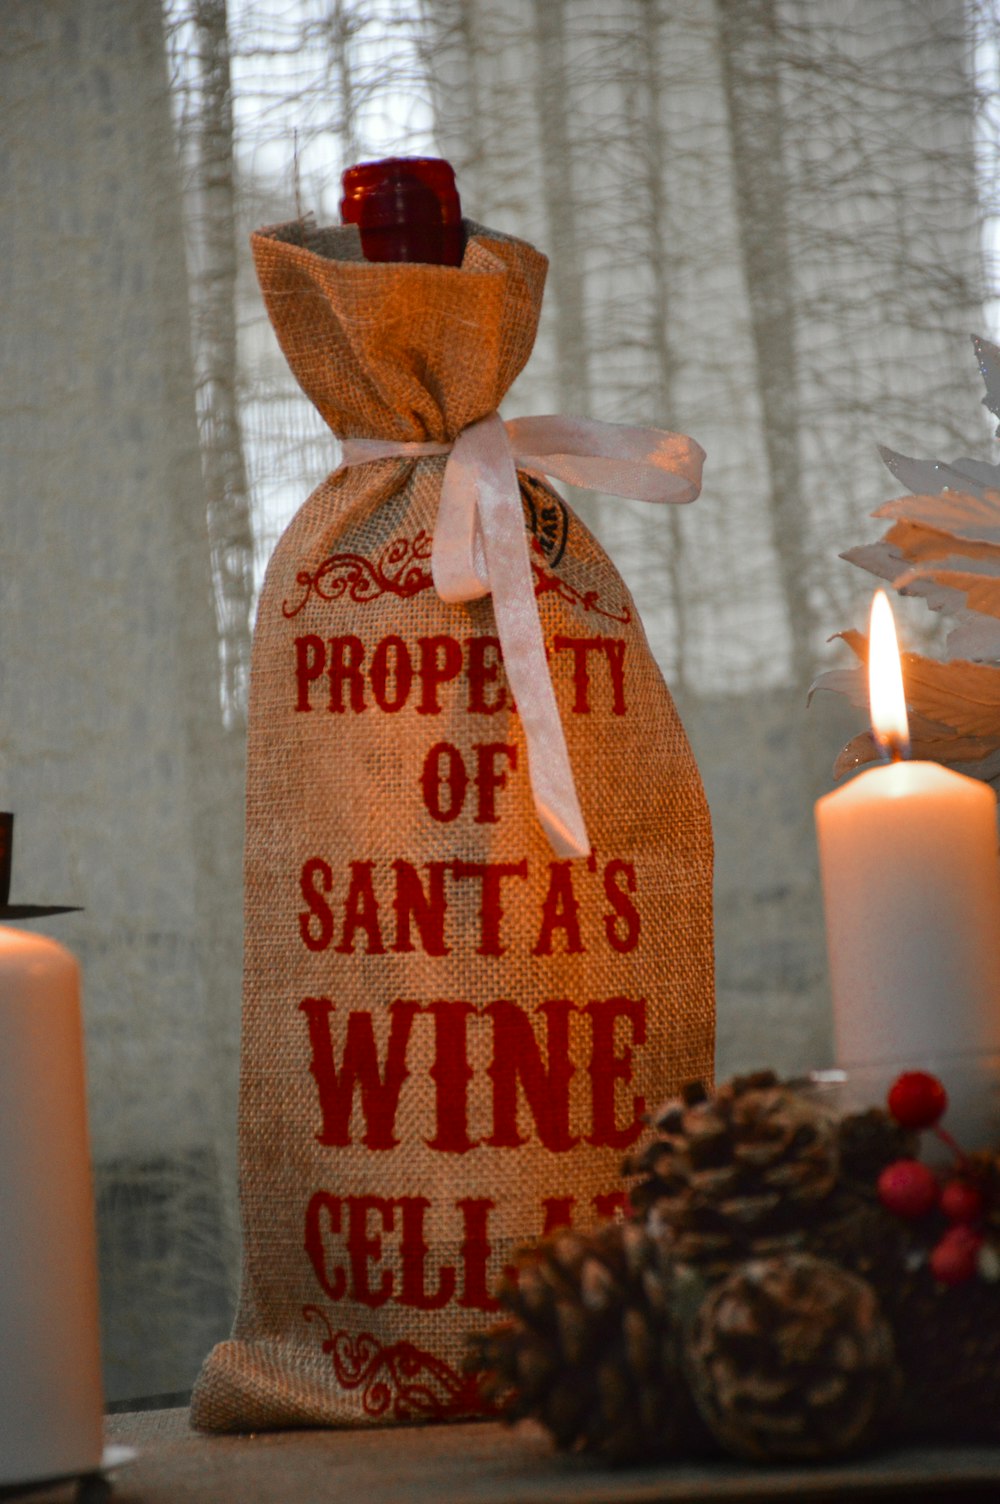 a bag of wine sitting on a table next to candles